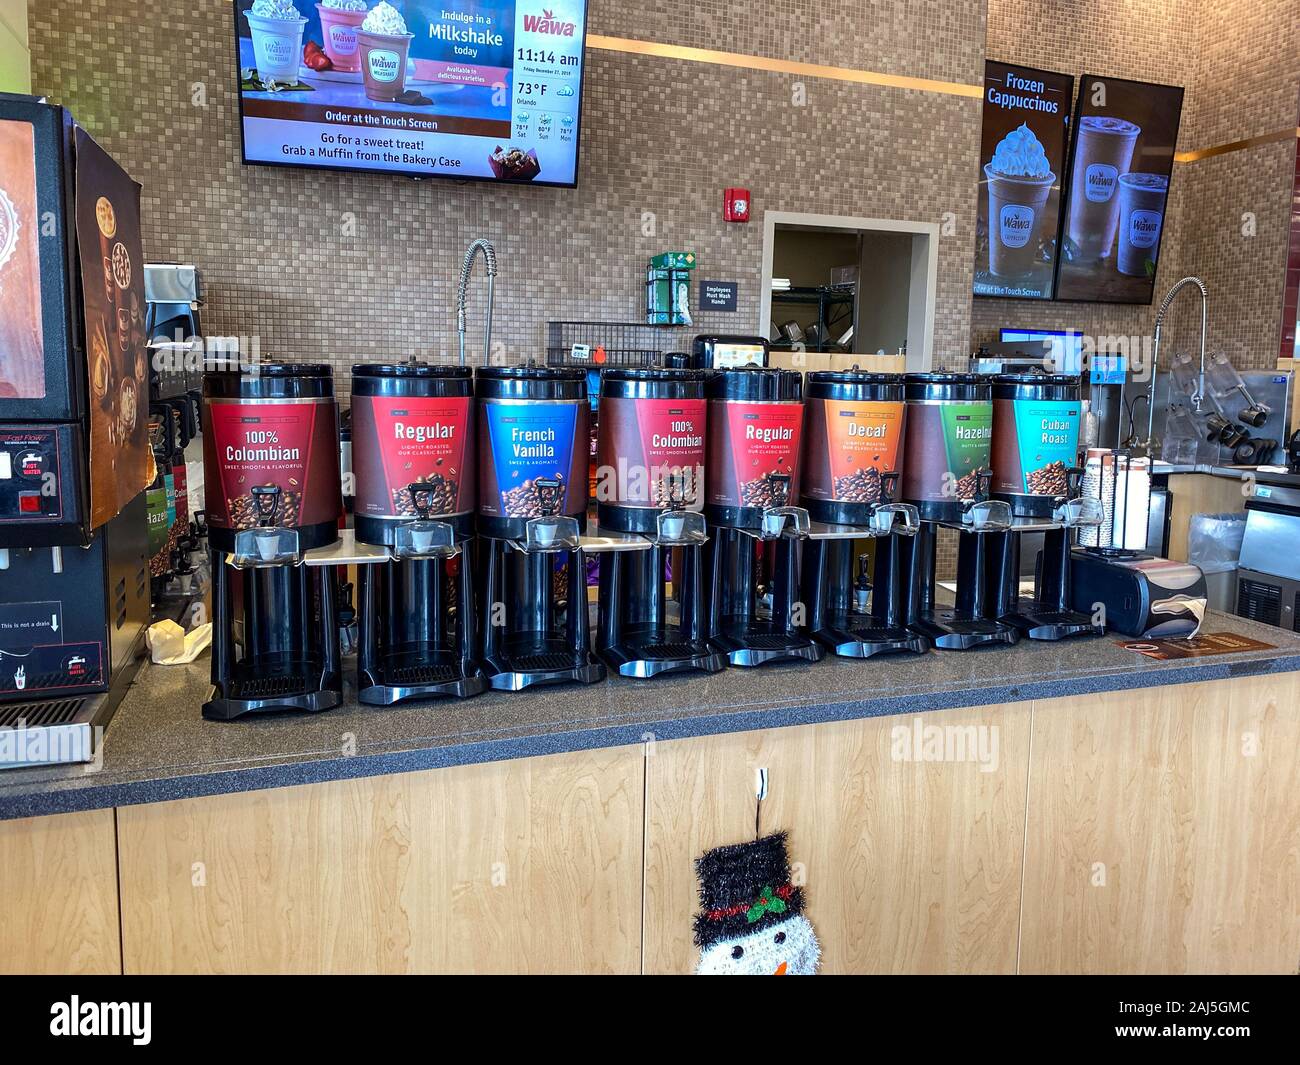 Orlando,FL/USA-12/25/19: A selection of coffee at a Wawa restaurant and gas station waiting for a customer to purchase a cup of coffee.. Stock Photo